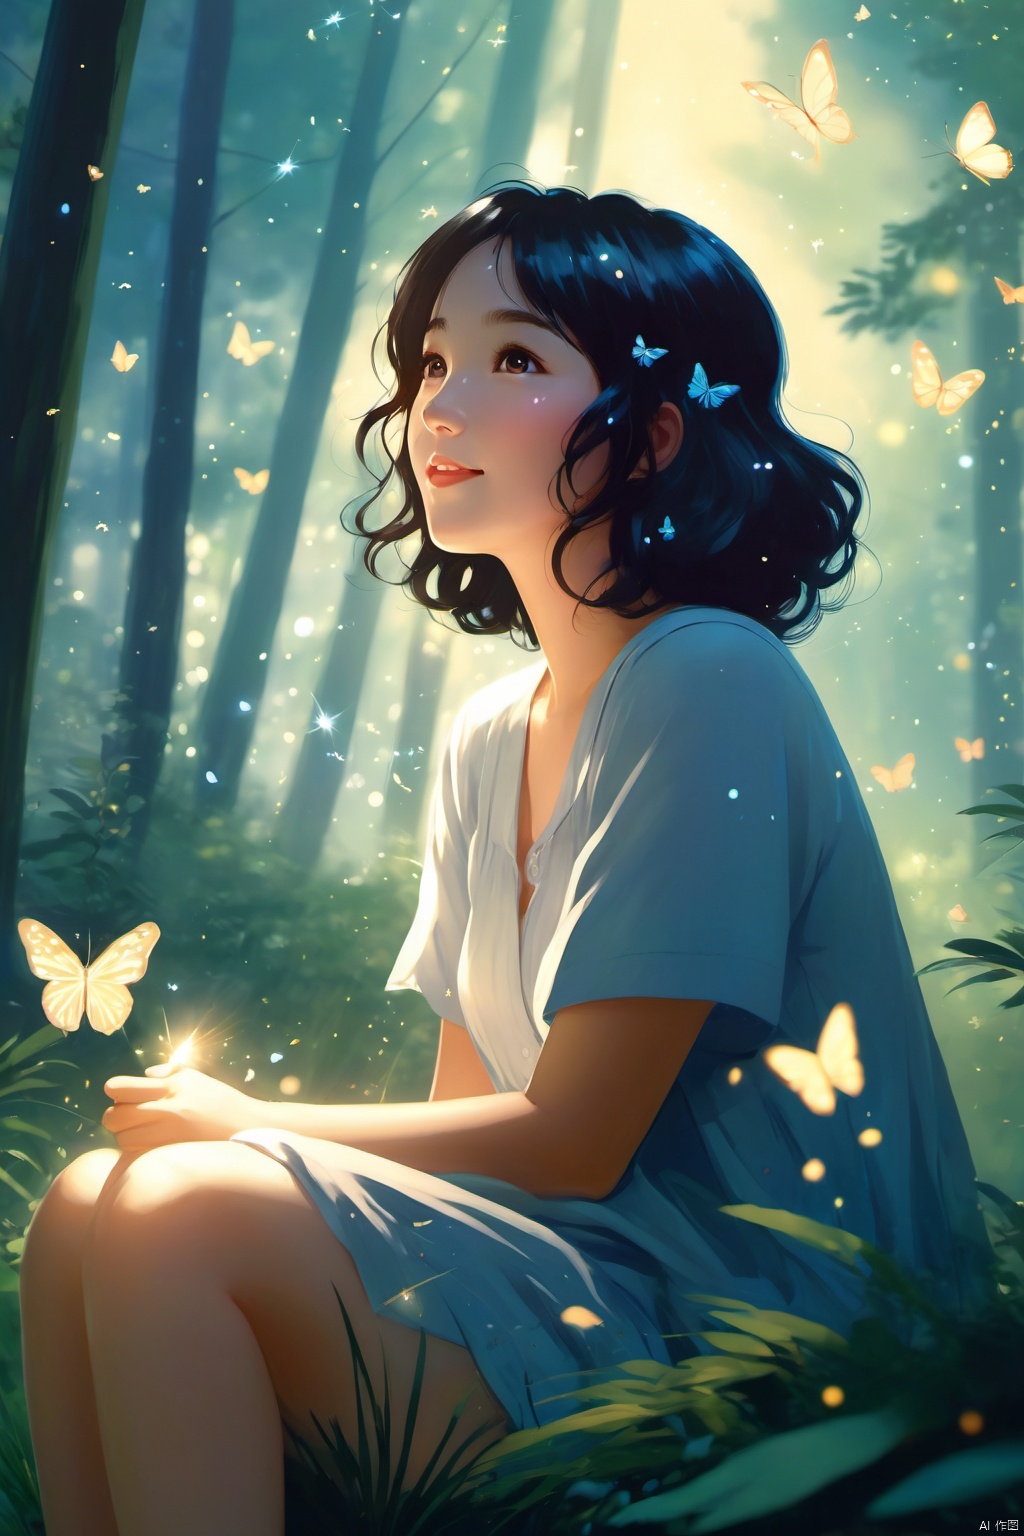 (masterpiece), manga style, soft lights, ethereal, magical looking, a candid looking woman with soft curly black hair, brown eyes, forest, fairytale, full body, tiny butterflies, illustration, magical, light particles, fireflies, art by Mschiffer merged with Makoto Shinkai, cute smile